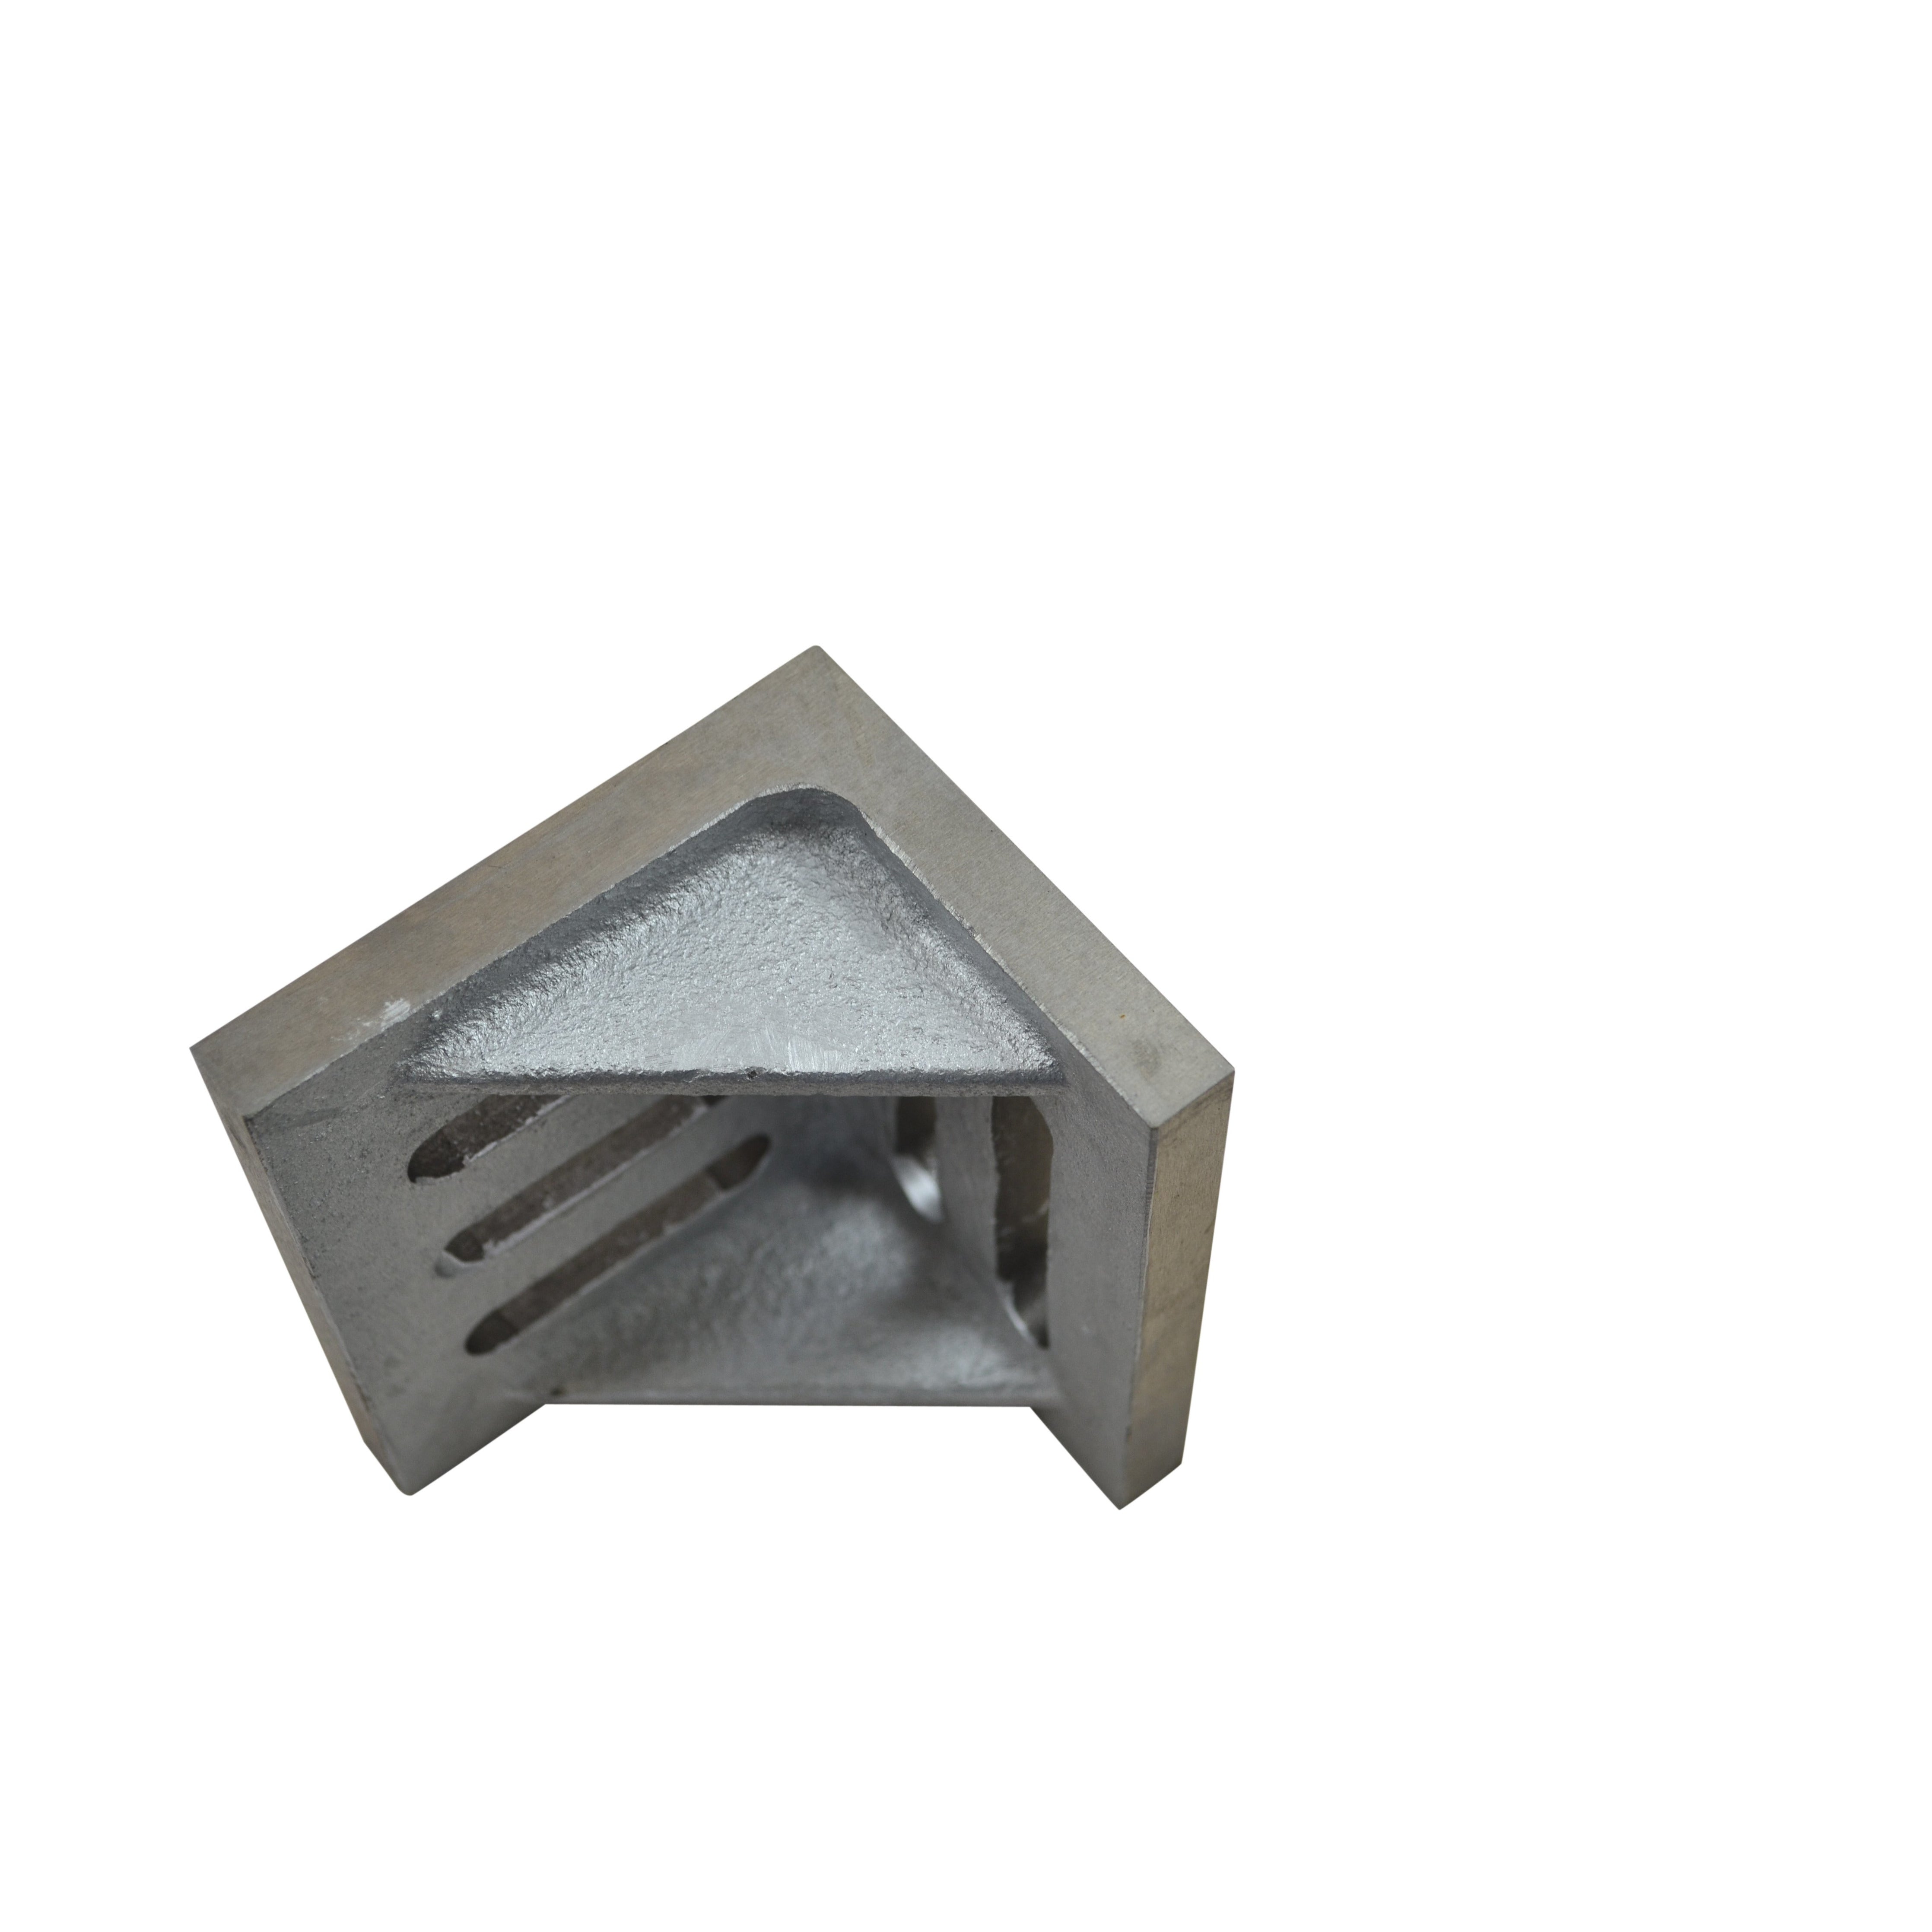 cast iron angle plate 4.5"x3.5"x3" precision tool machining milling cnc measurement metalwork 